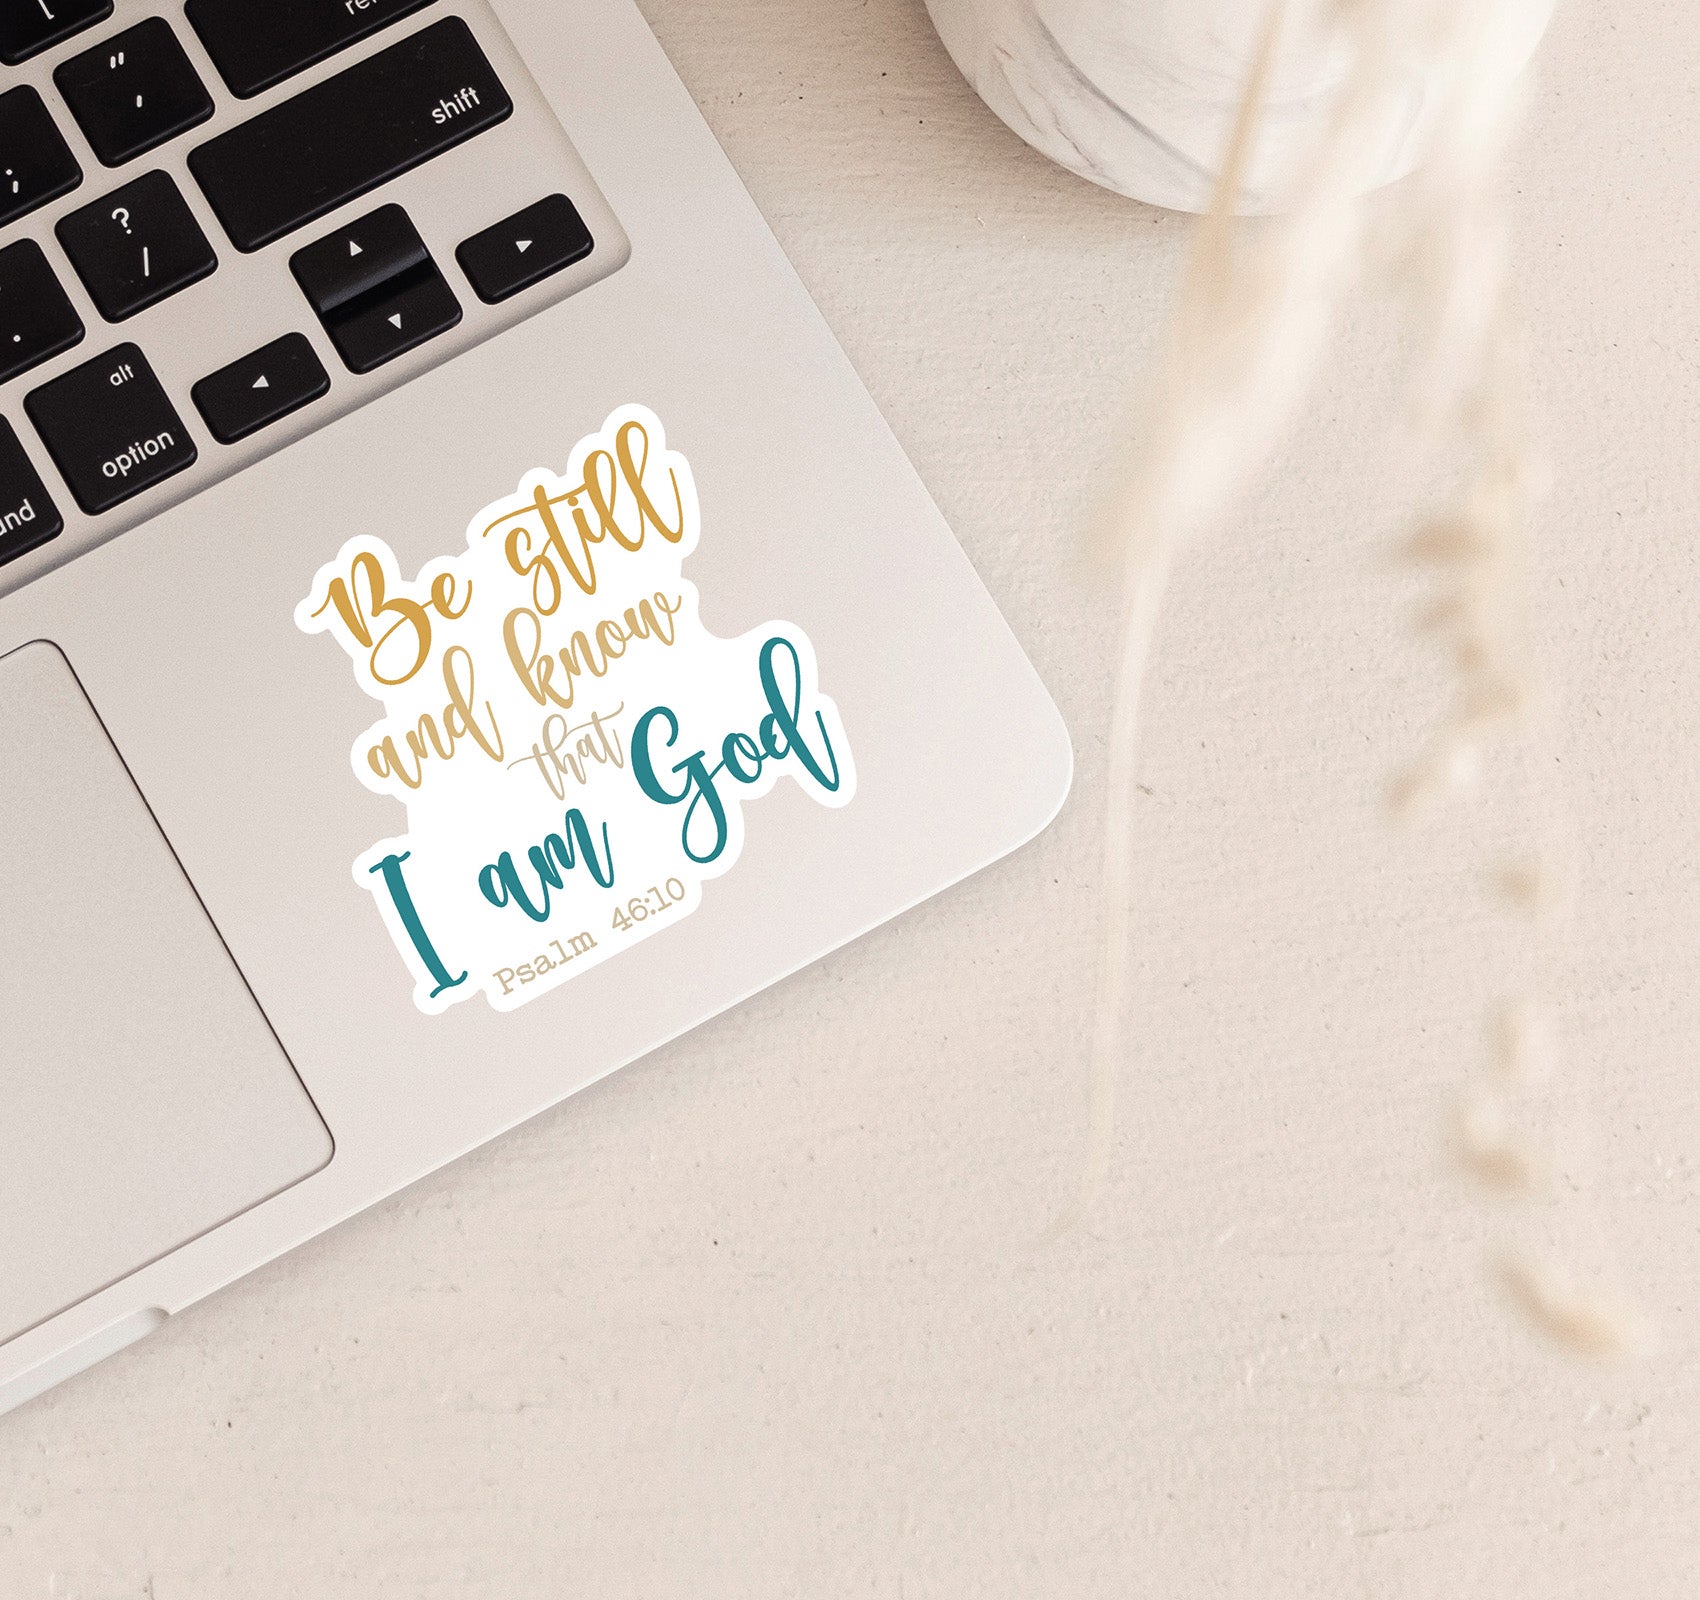 Be Still and Know that I am God Psalm Inspirational Christian 2 Planner  Calendar Scrapbooking Crafting Clear Stickers 